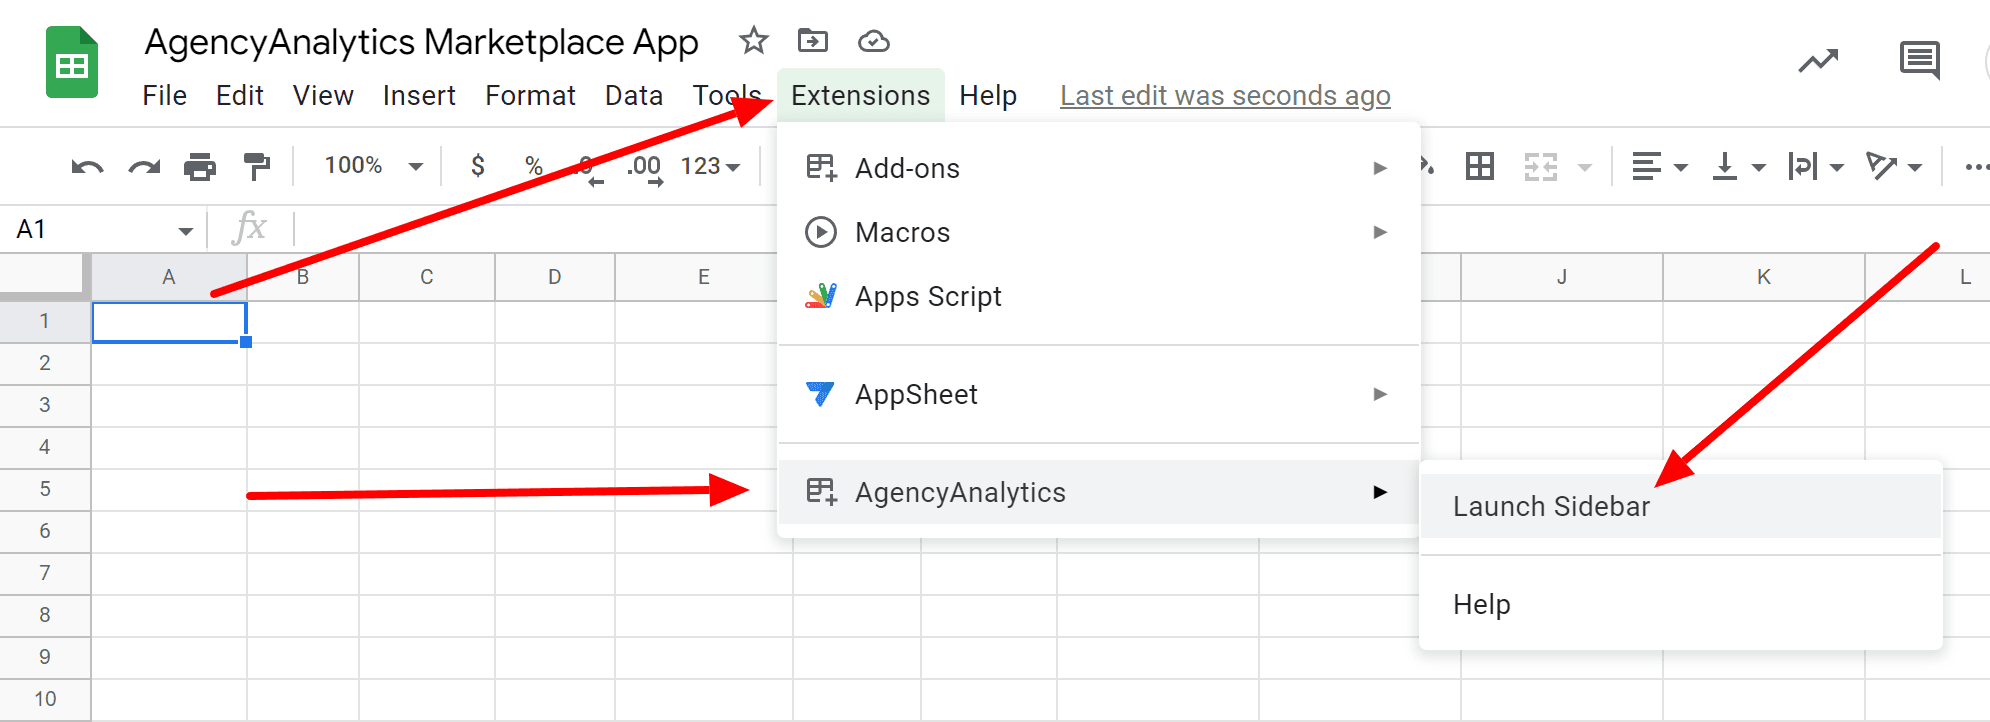 An image showing how to launch the AgencyAnalytics for Google Sheets sidebar